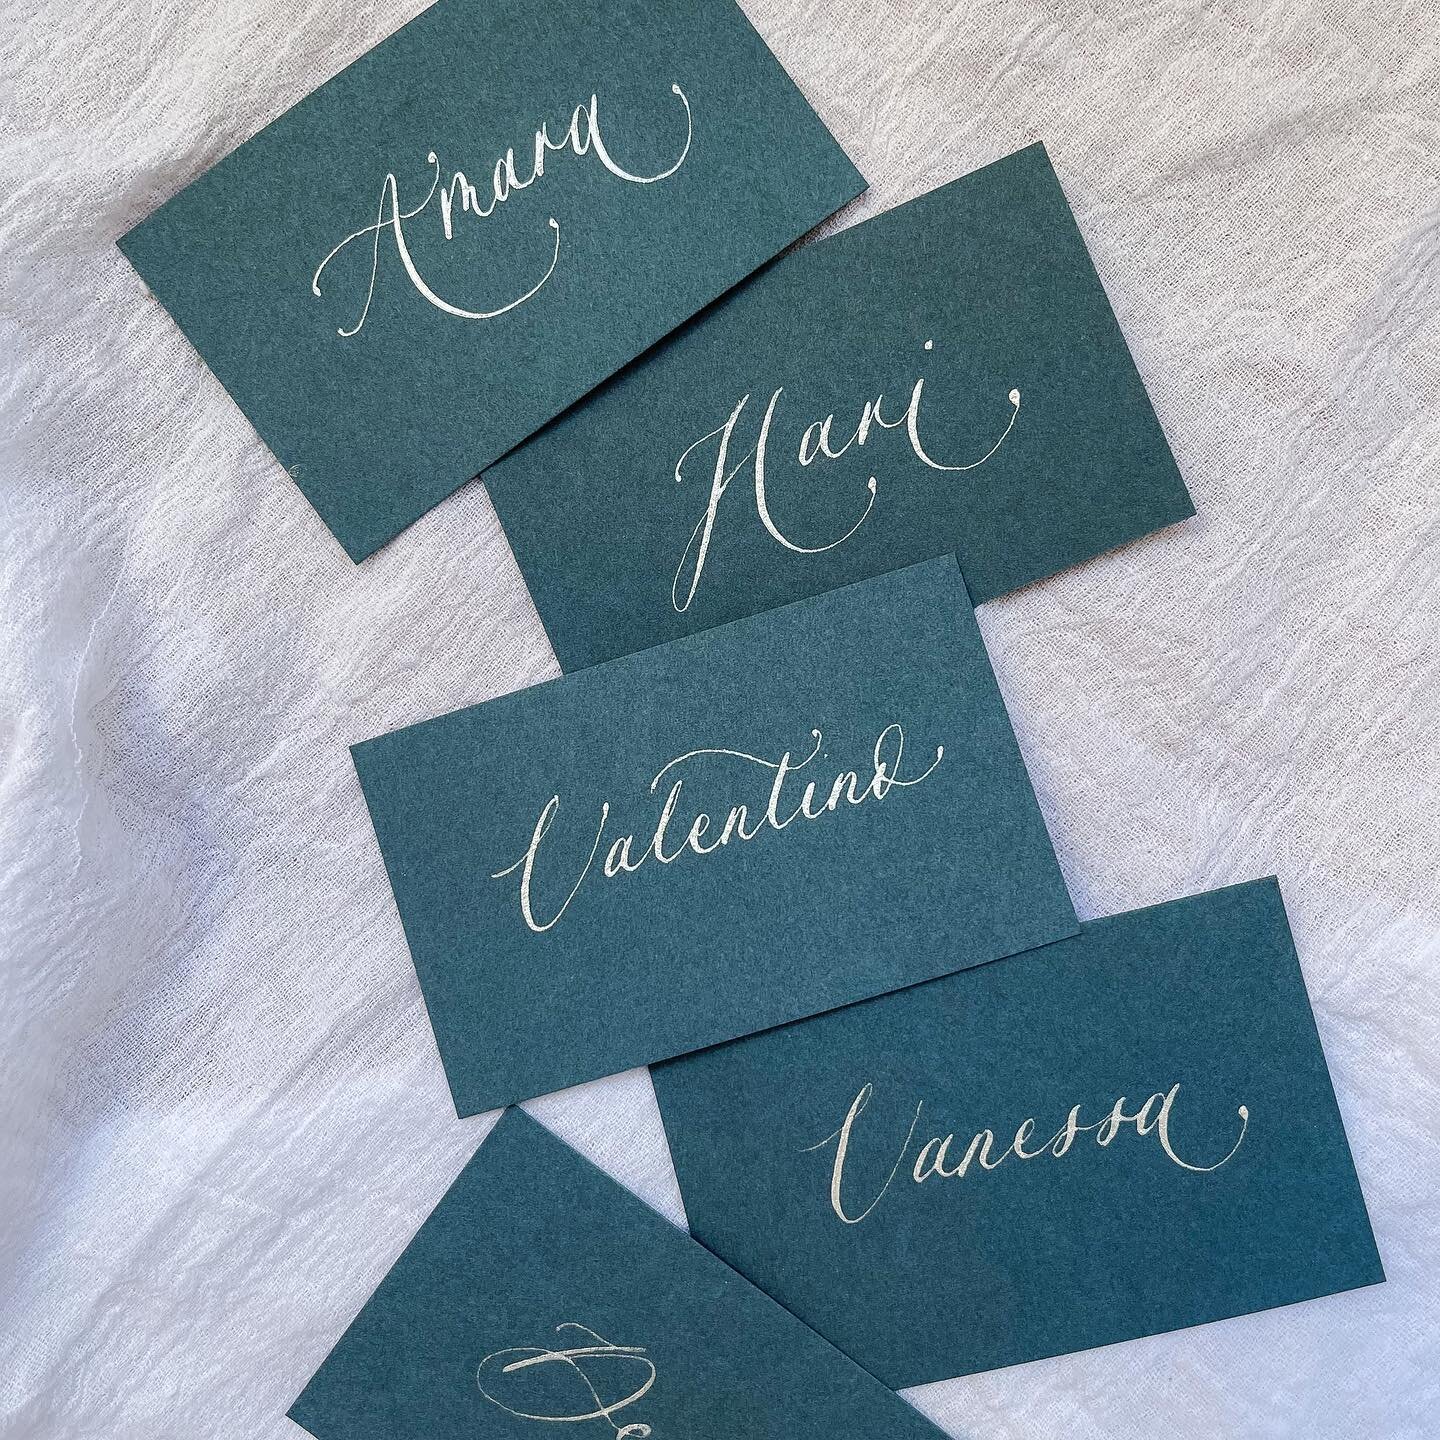 WINTER // as we head into winter months, silvers, blues and dark greens start to shine ❄️ Marina blue place cards with silver ink calligraphy can be a good choice if you&rsquo;re colour palette features blues xx 
.
.
.
.
.
.
.
.
.
#calligraphy #weddi